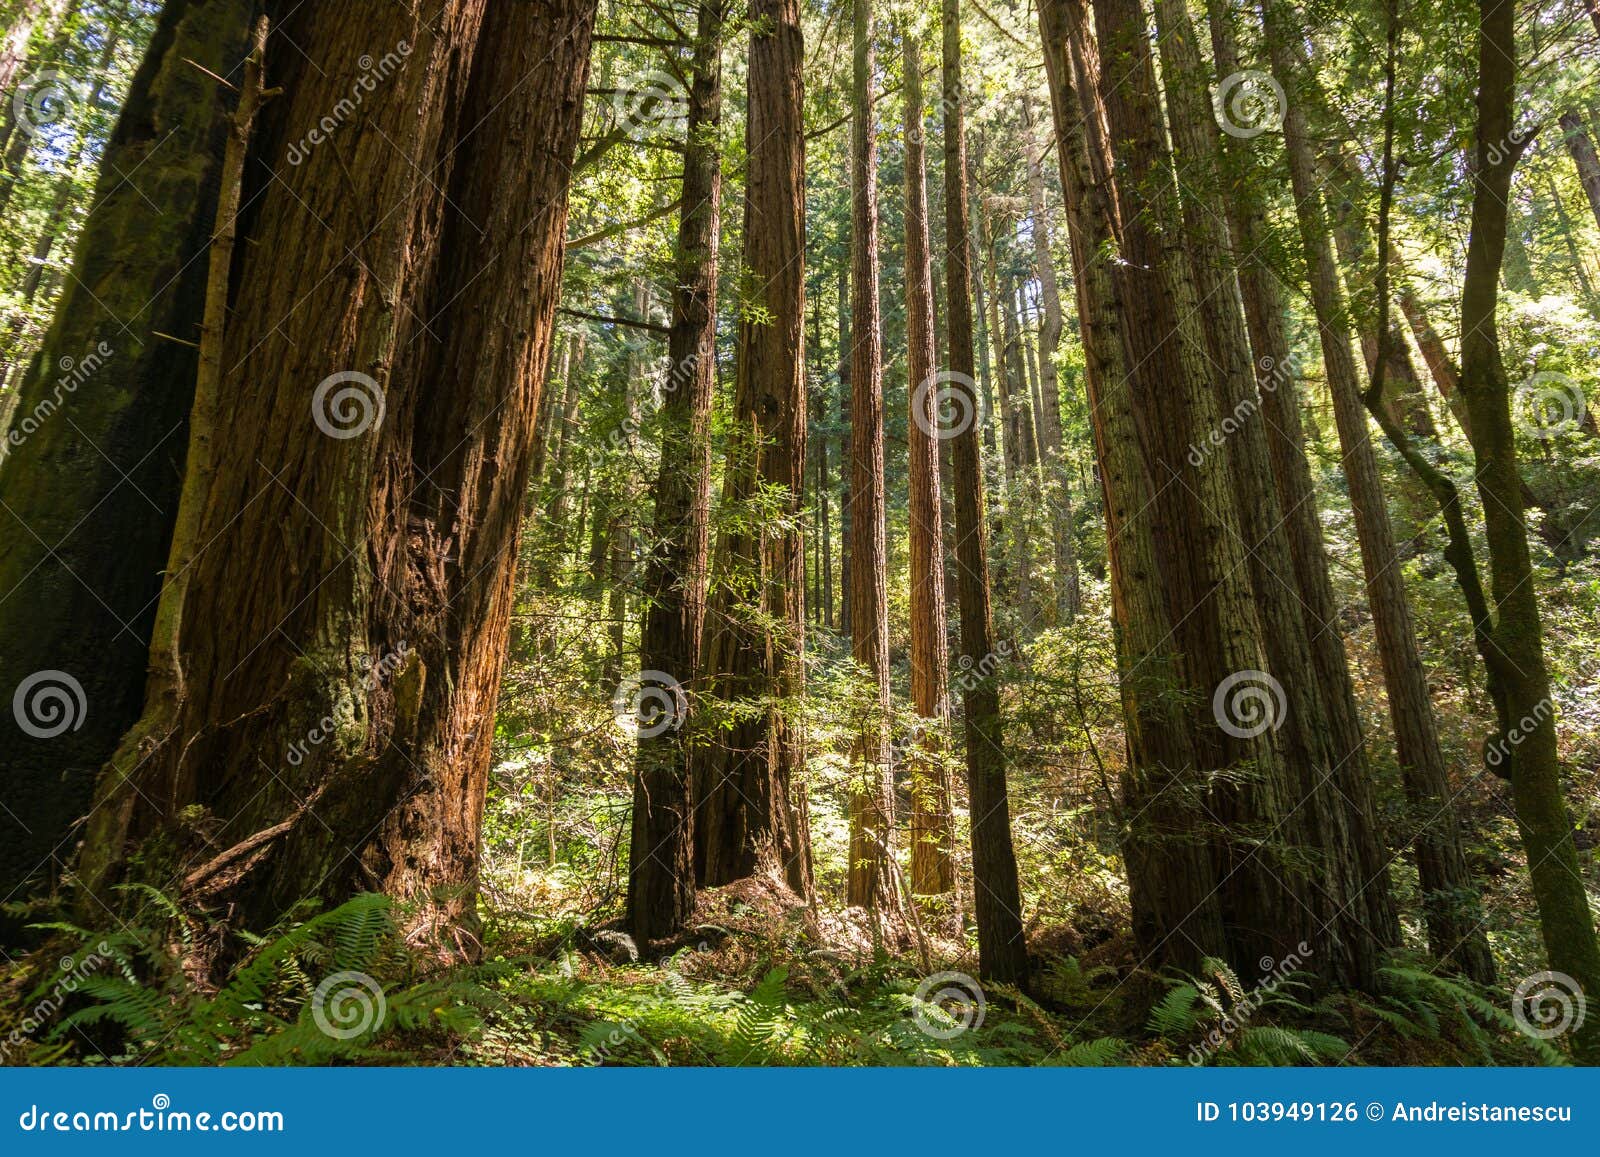 sunny day in a redwood trees sequoia sempervirens forest, california